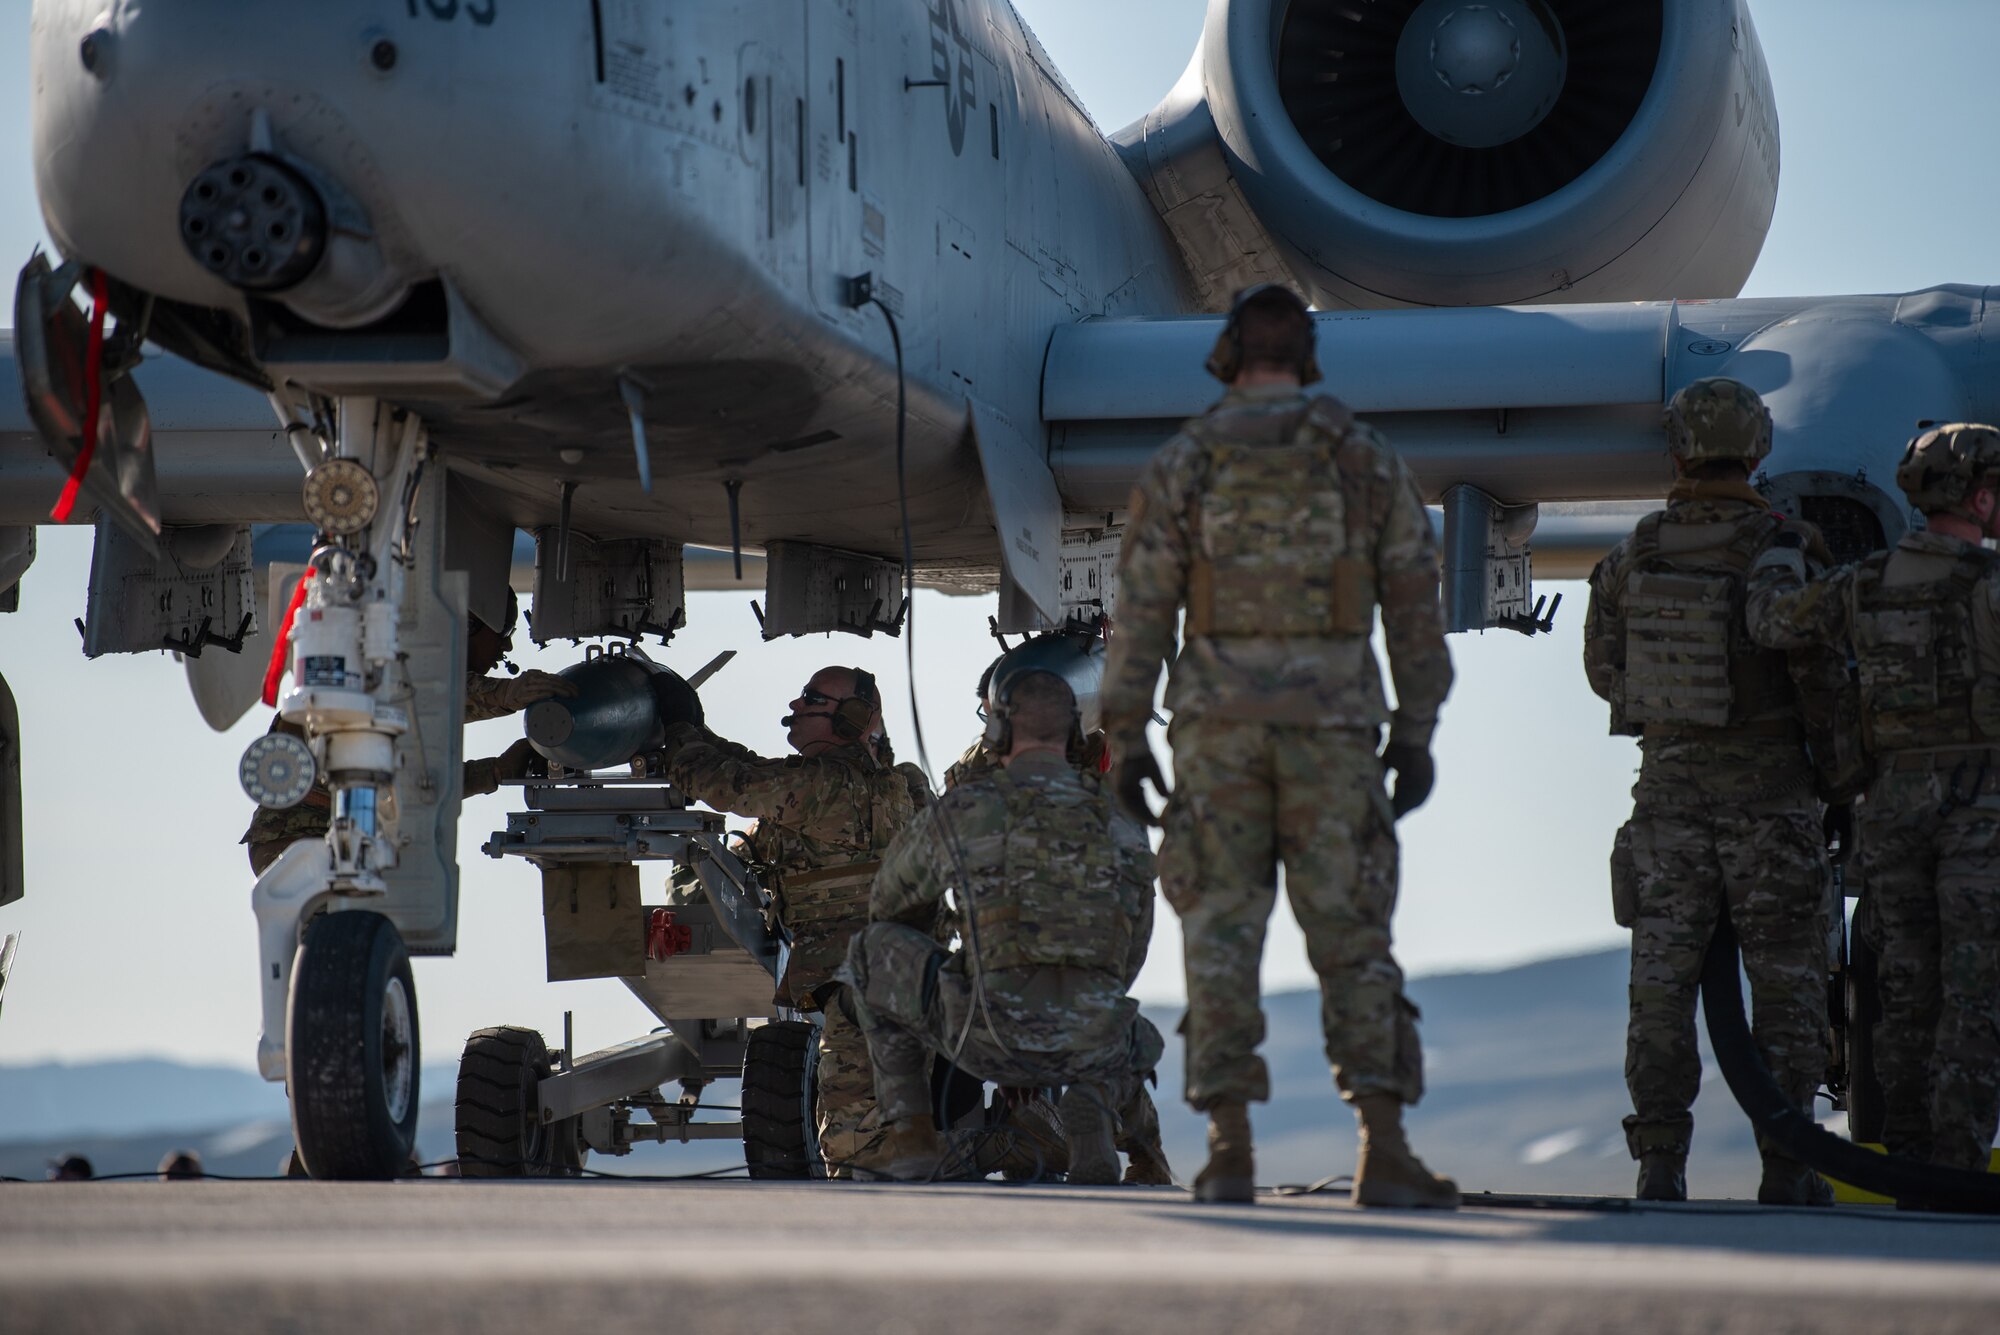 Airmen with the 127th Fighter Wing conduct an Integrated Combat Turn weapons reload on one of their A-10 Thunderbolt IIs on Highway 287 in Wyoming during Exercise Agile Chariot, April 30, 2023, honing capabilities linked to Agile Combat Employment. Instead of relying on large, fixed bases and infrastructure, ACE employs smaller, more dispersed locations and teams to rapidly move aircraft, pilots and other personnel as needed. Under ACE, millions of miles of public roads can serve as functional runways with Forward Arming and Refueling Points when necessary. (U.S. Air National Guard photo by Master Sgt. Phil Speck)